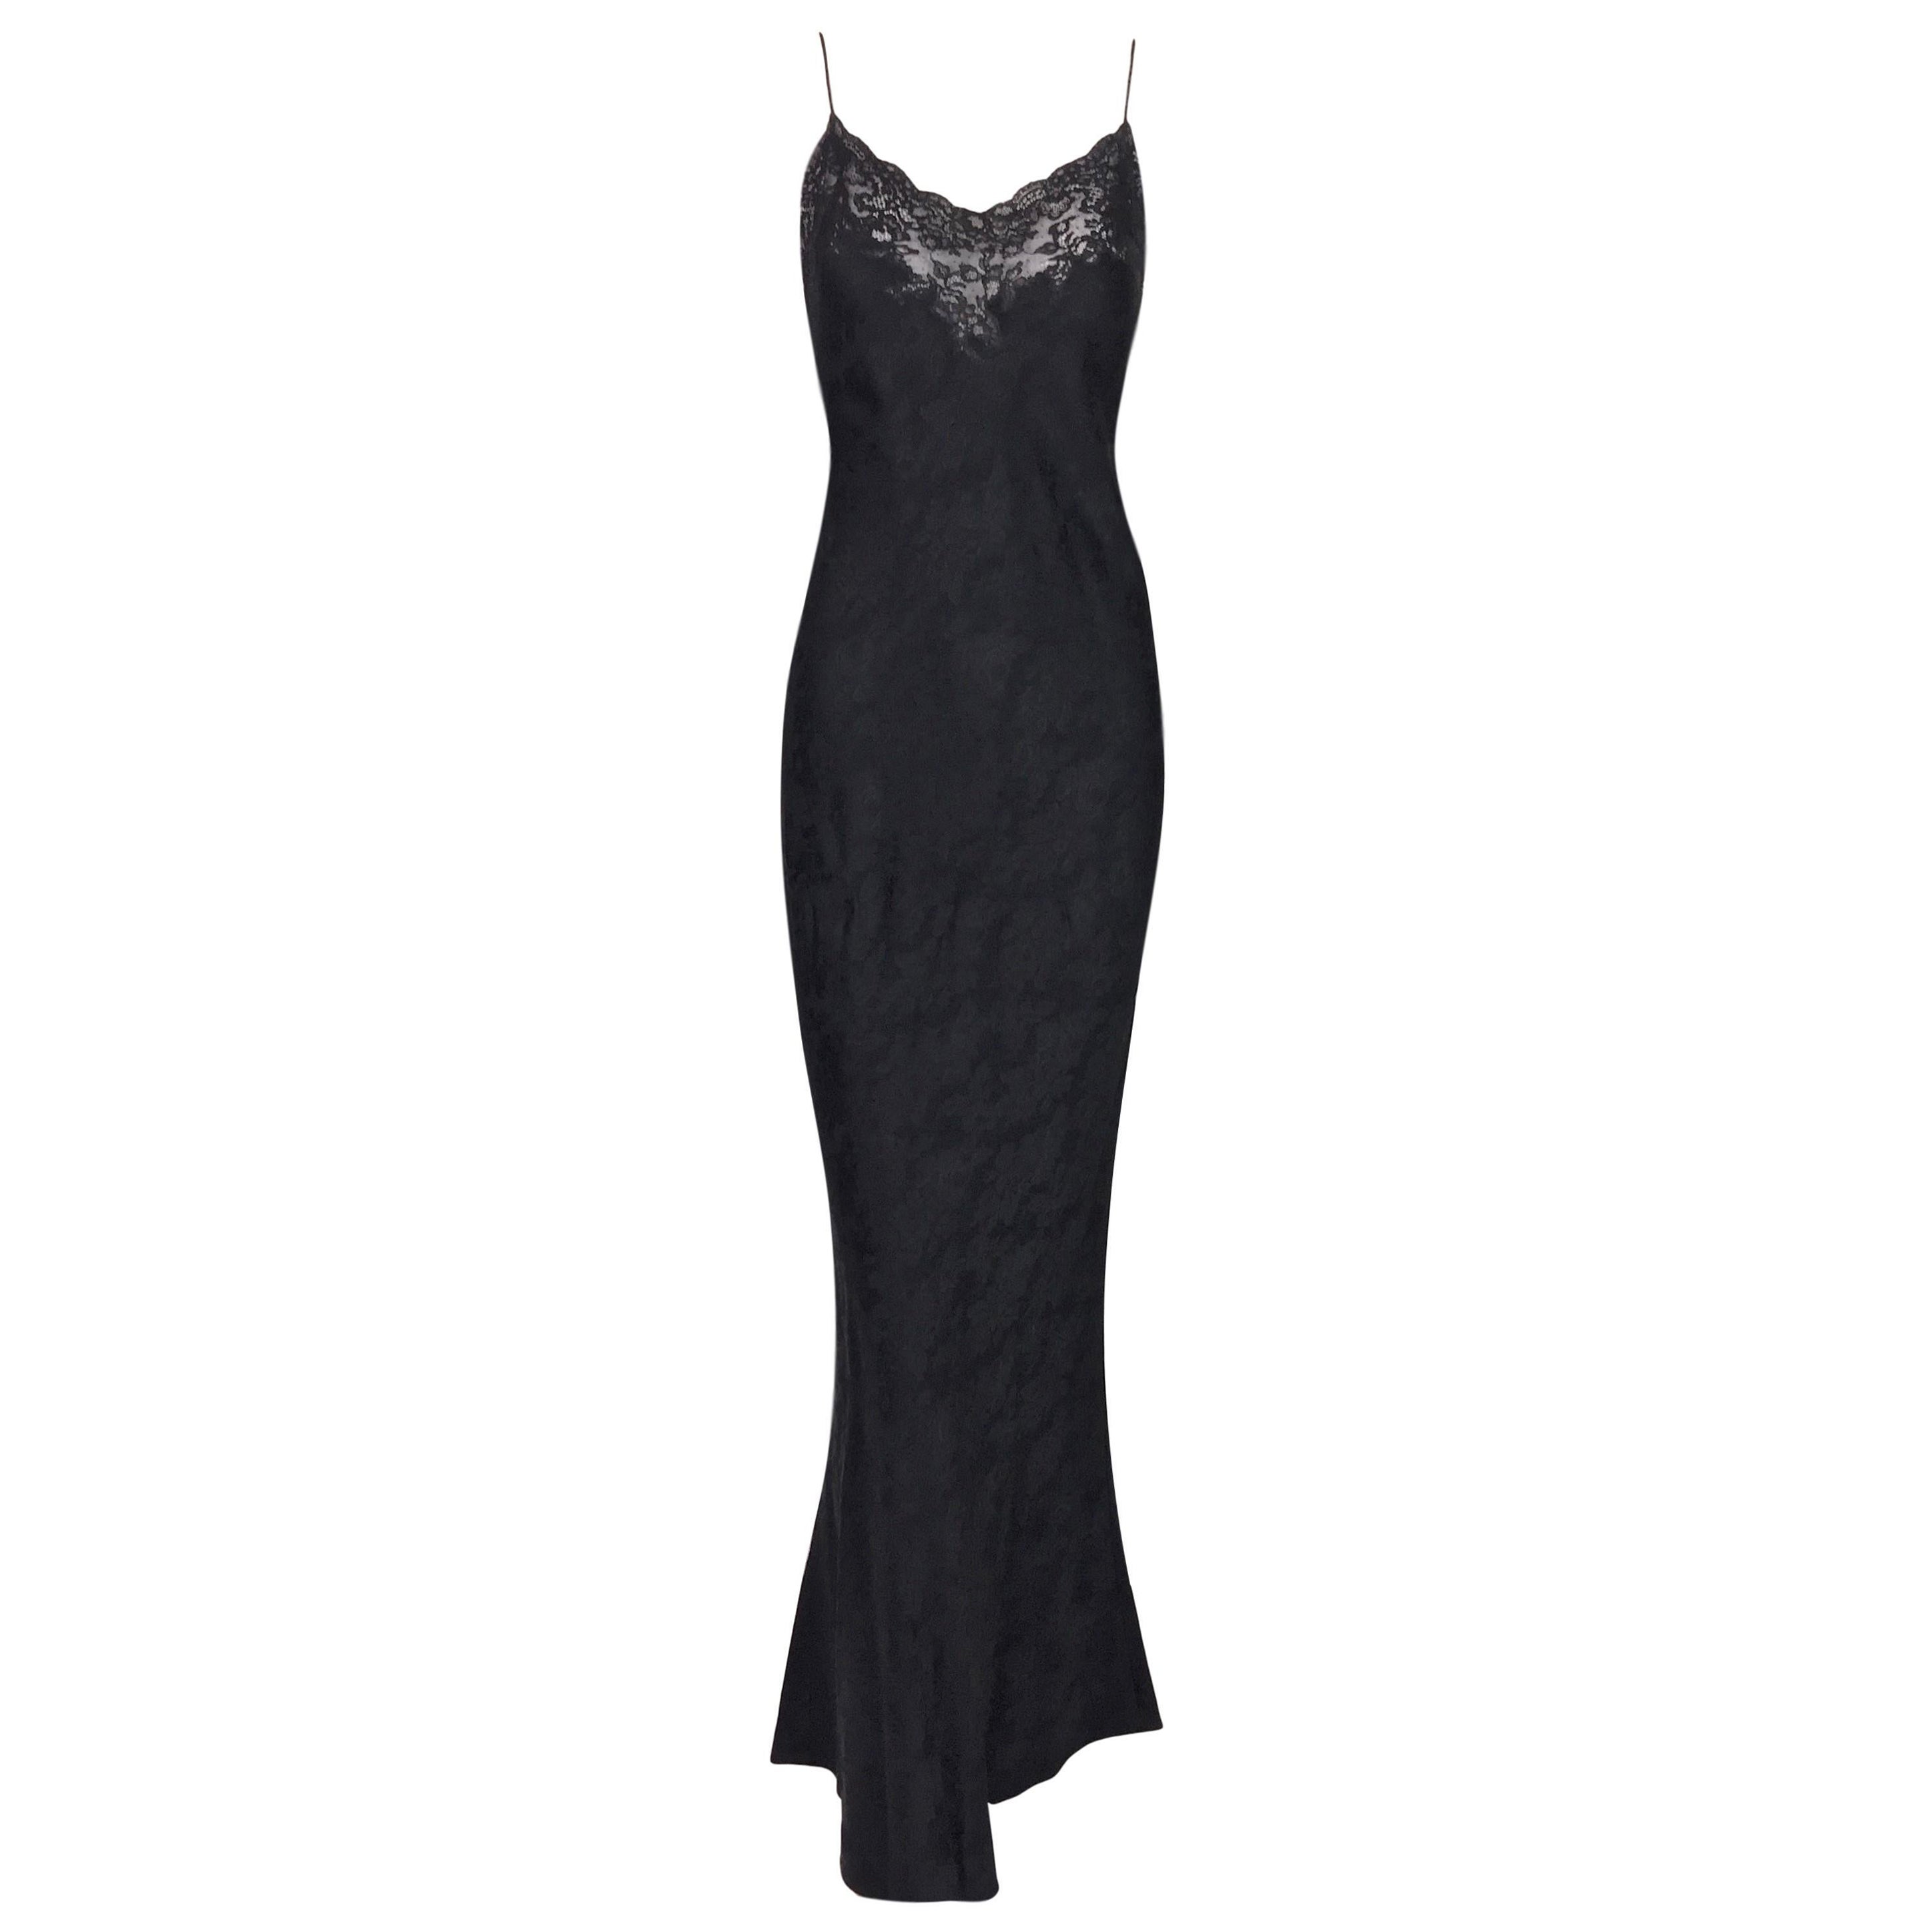 F/W 1998 Christian Dior John Galliano Sheer Lace Black Plunging Long Slip Dress For Sale